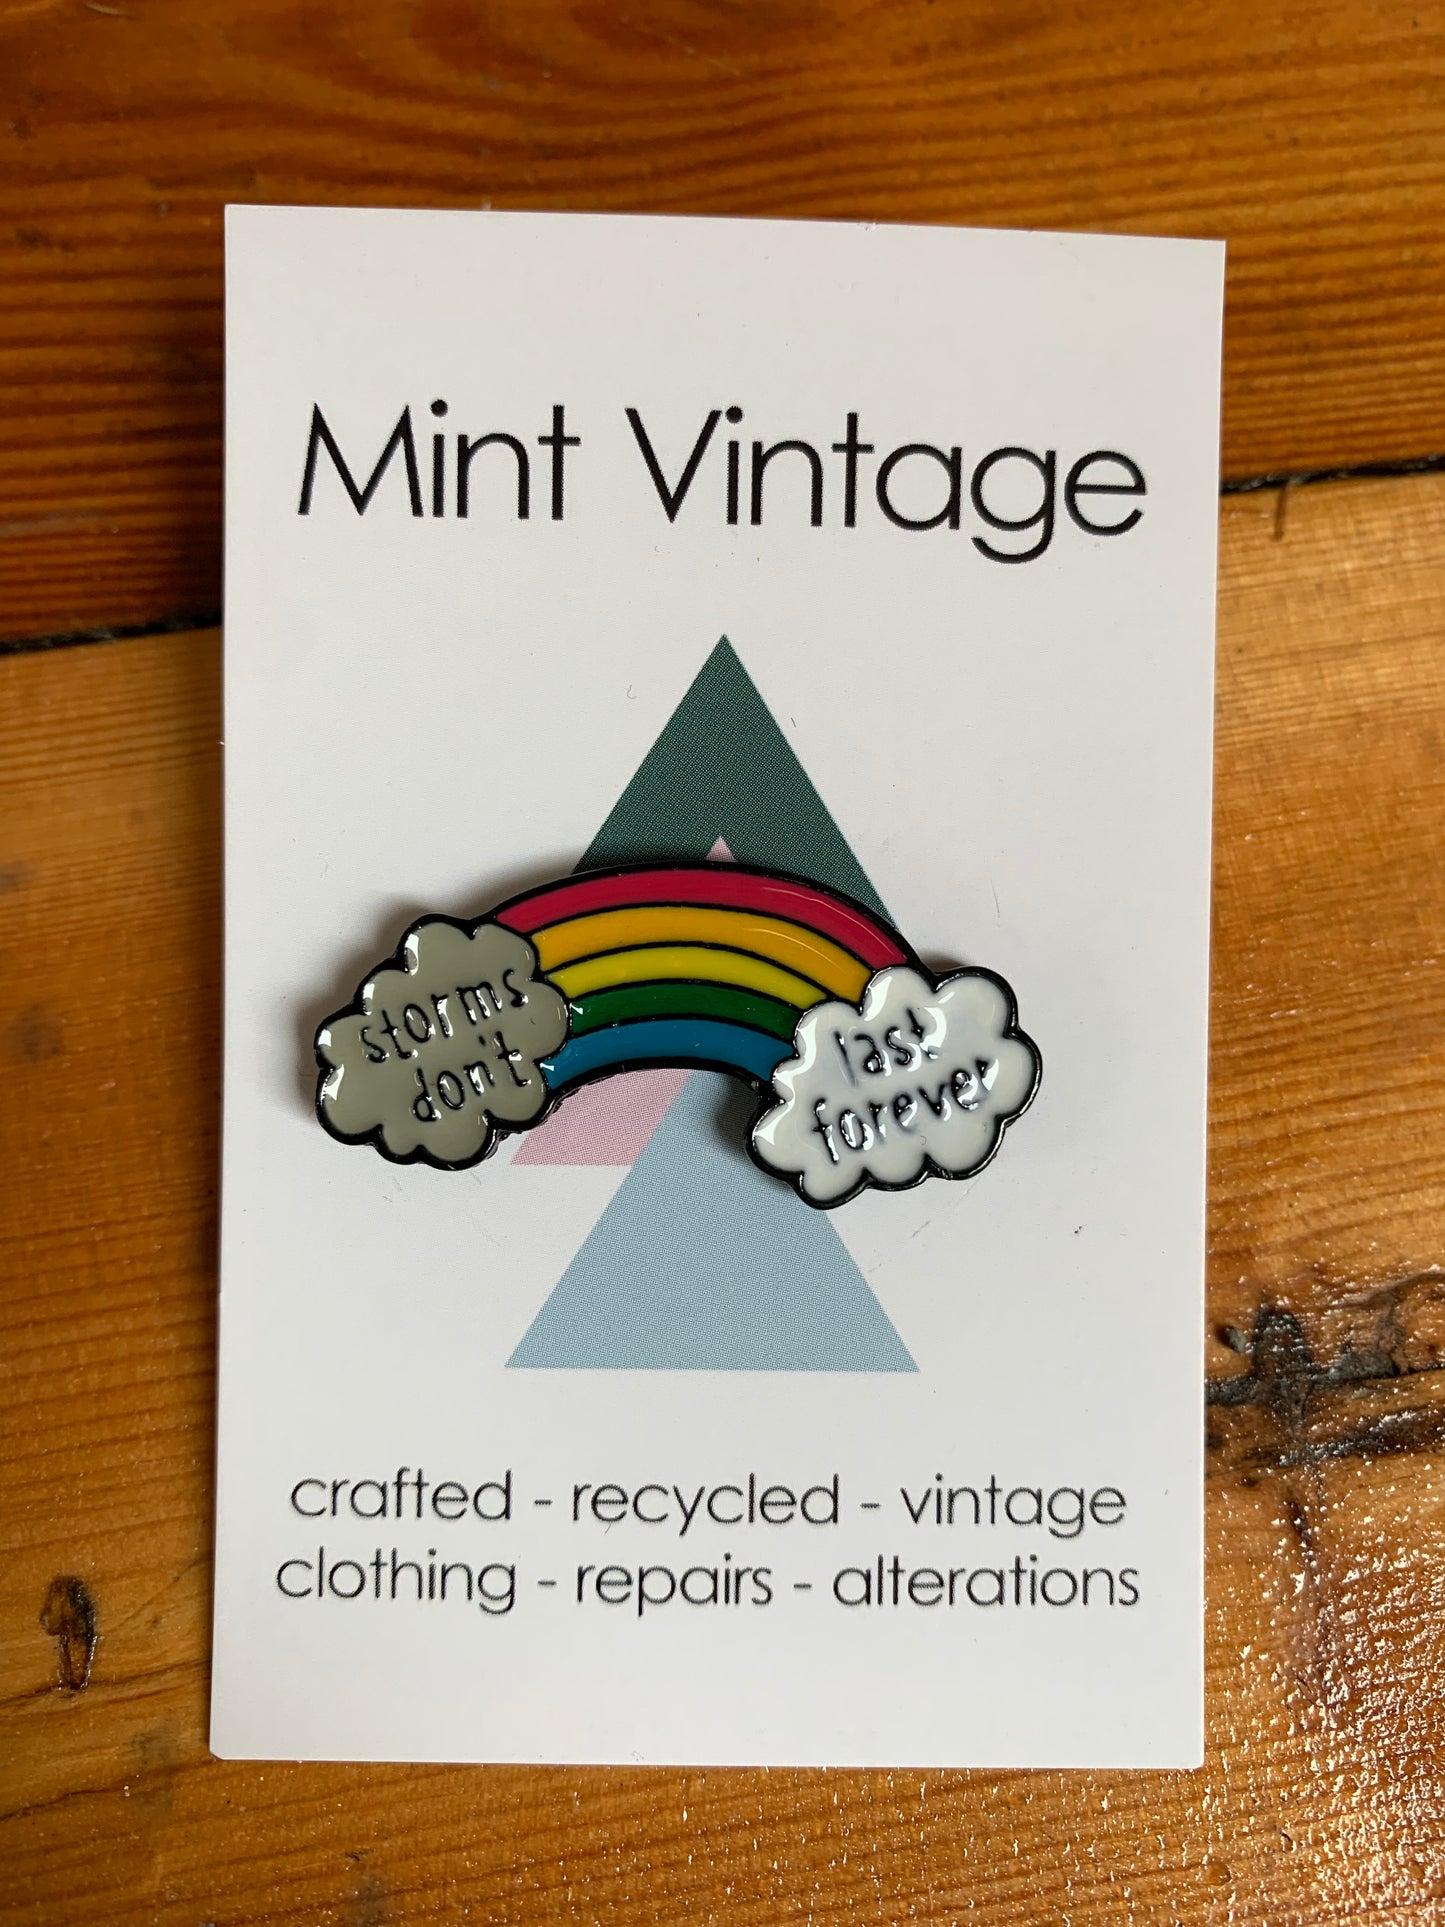 Rainbow “storms don’t last forever” pin badge